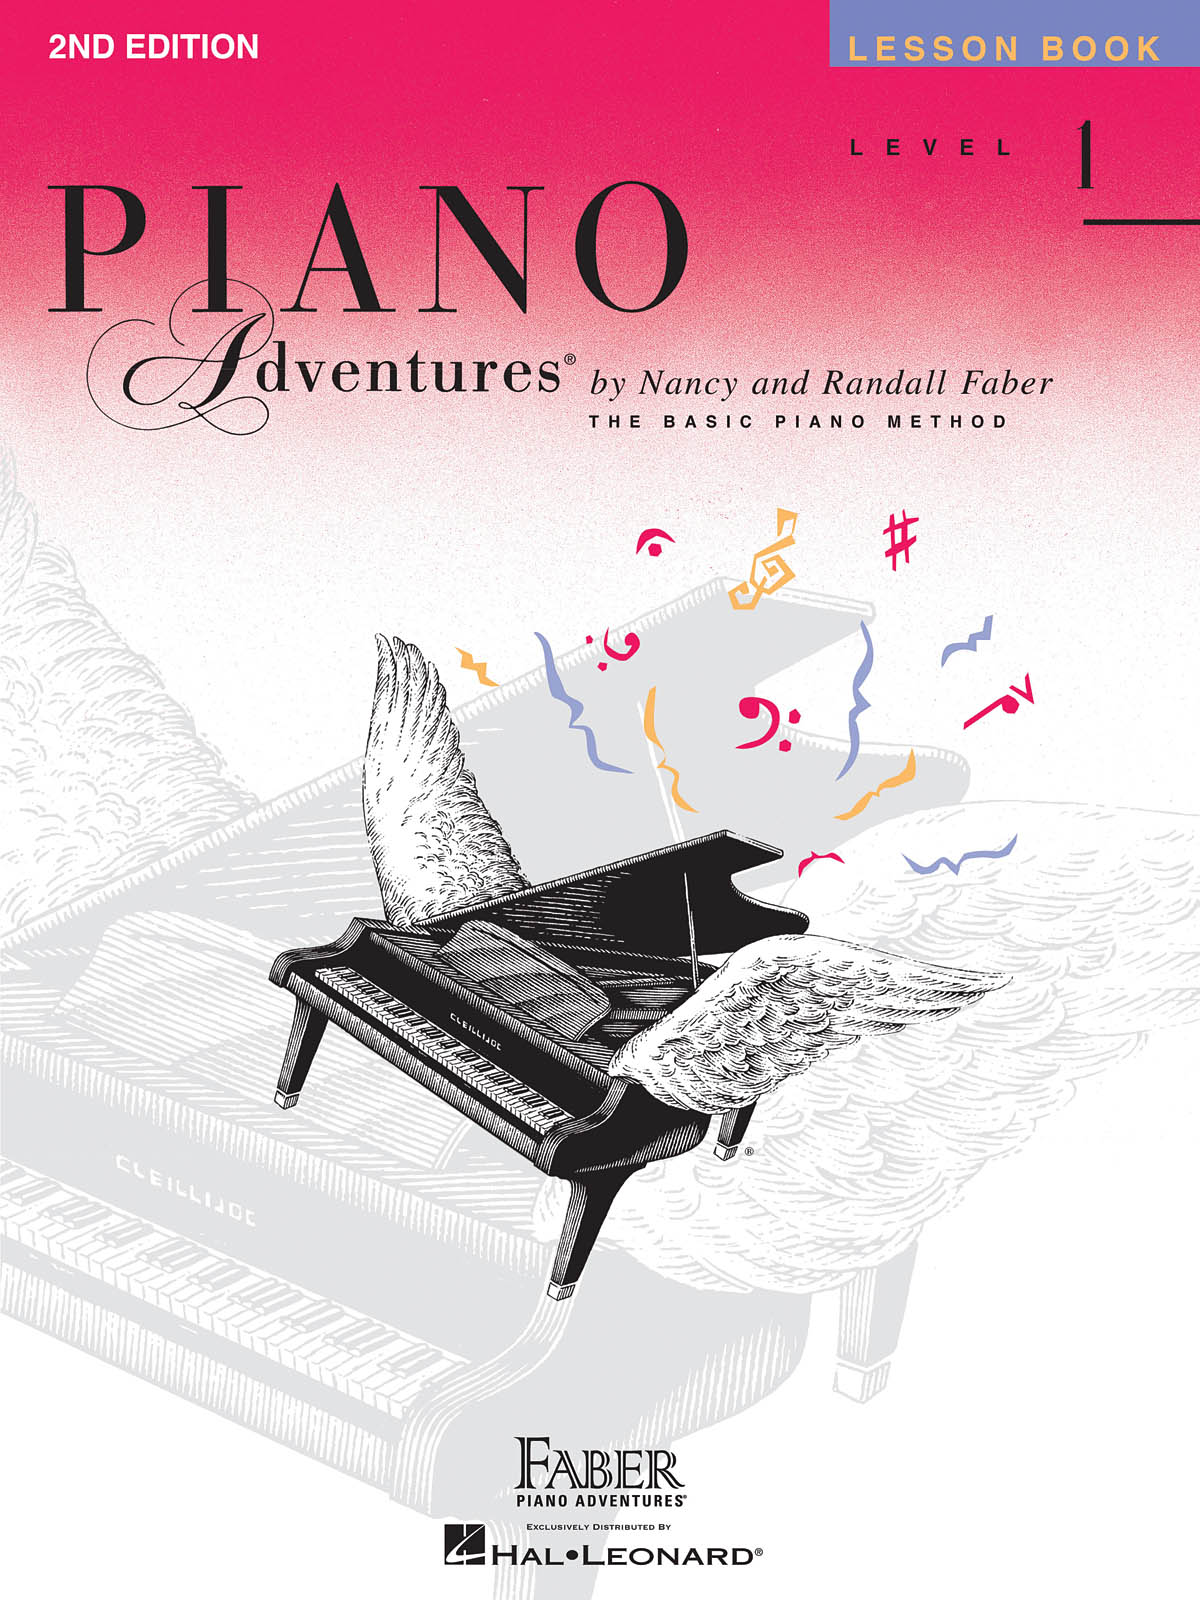 Piano Adventures Lesson Book Level 1 - 2nd Edition